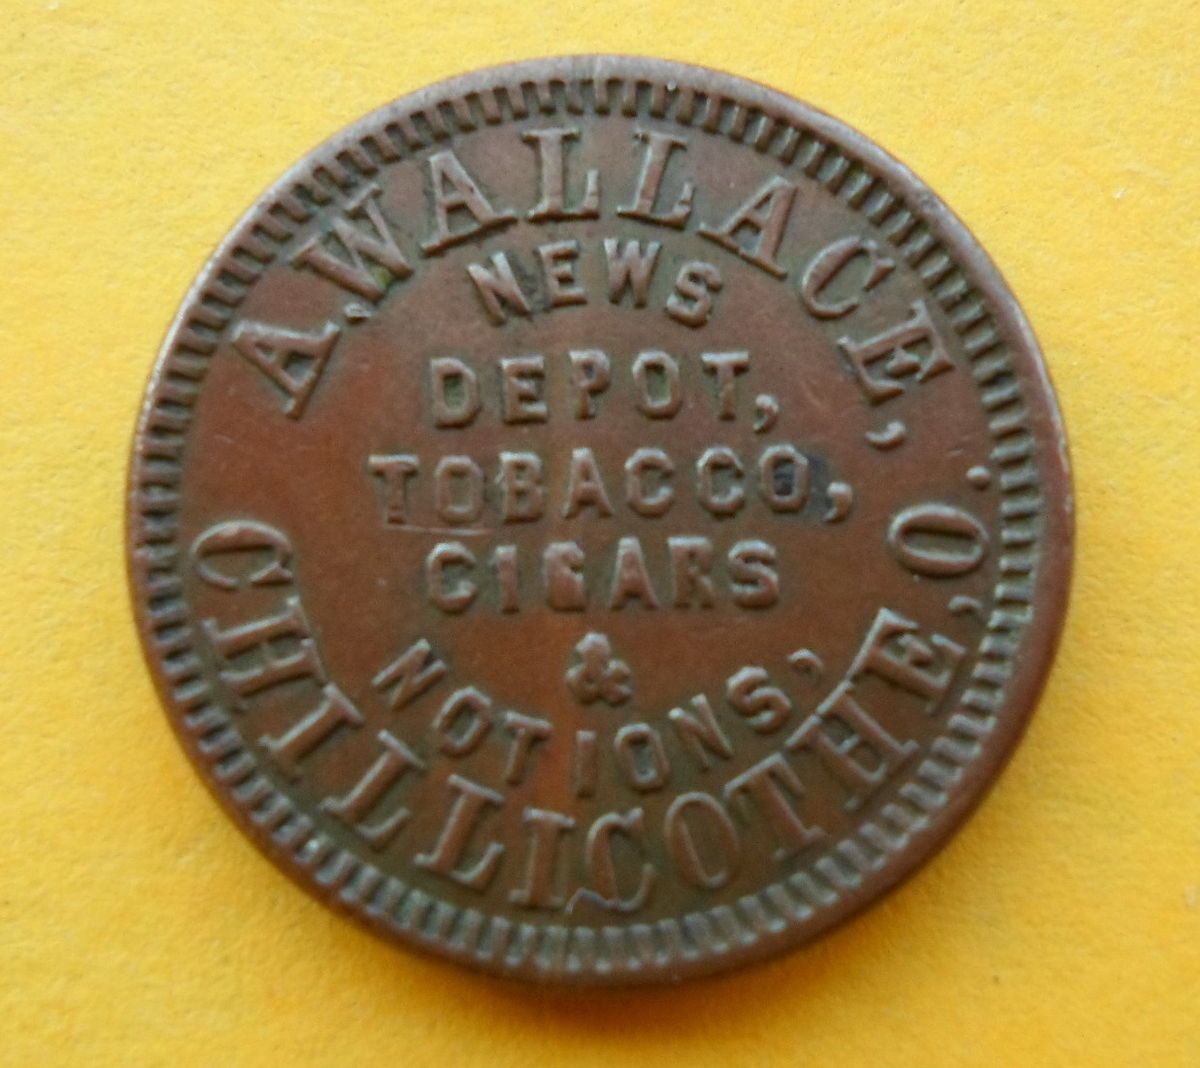 Oh 160J 1A Chillicothe O A Wallace Tobacco Cigars Civil War Token 